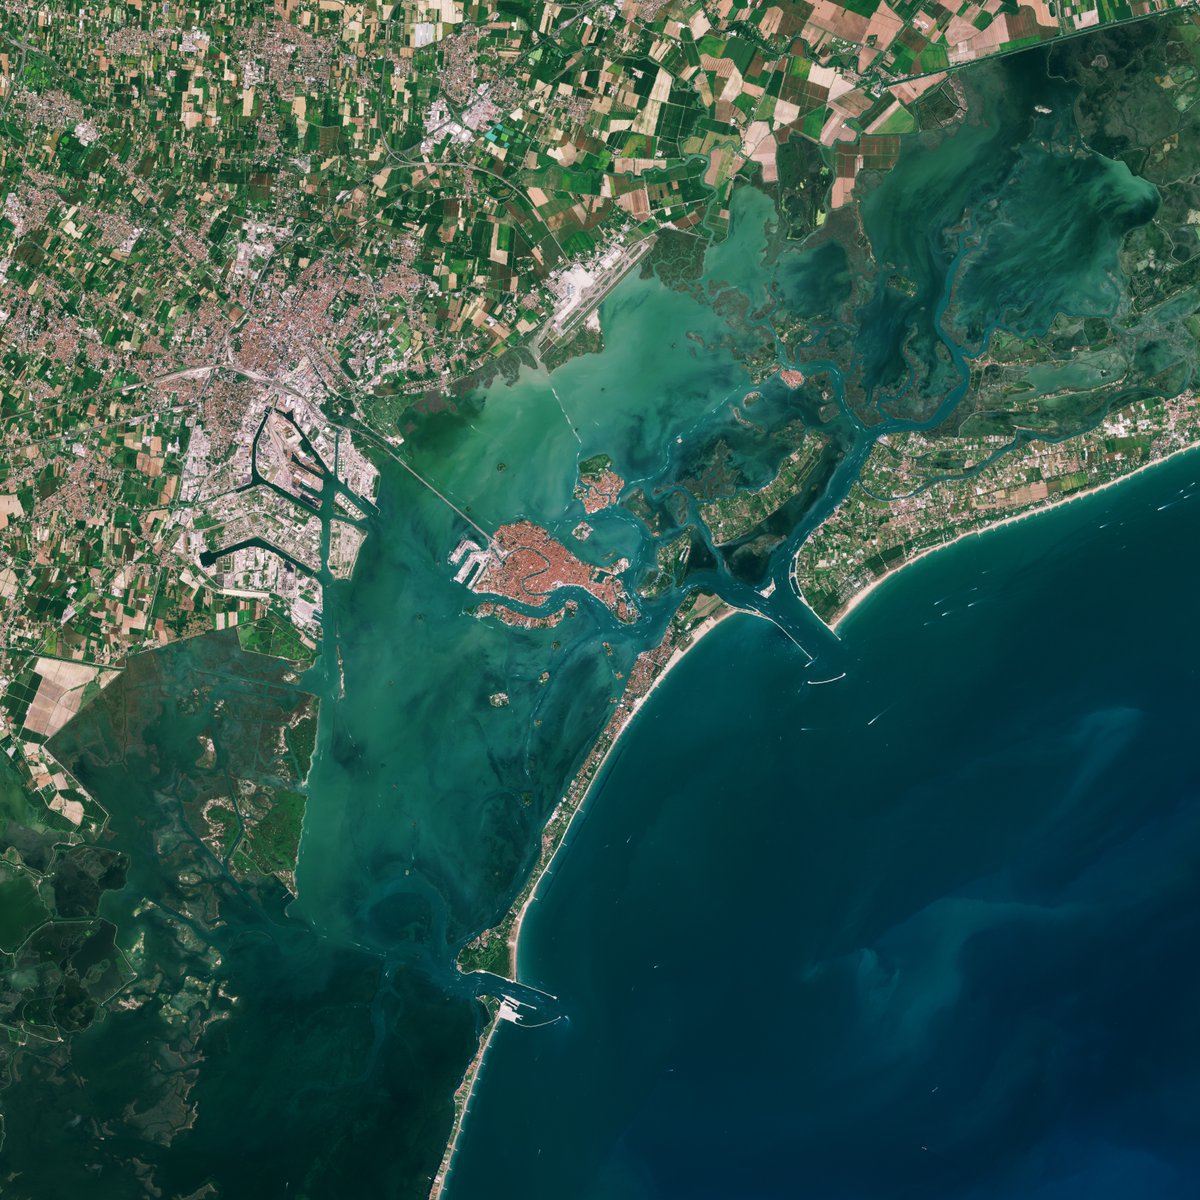 Buongiorno Venezia! This @CopernicusEU #Sentinel2 image features the city of Venice in Italy. The small square island to the north is San Michele. Once a prison island, it became a cemetery when Napoleon’s occupying forces declared burial on the main islands unsanitary.